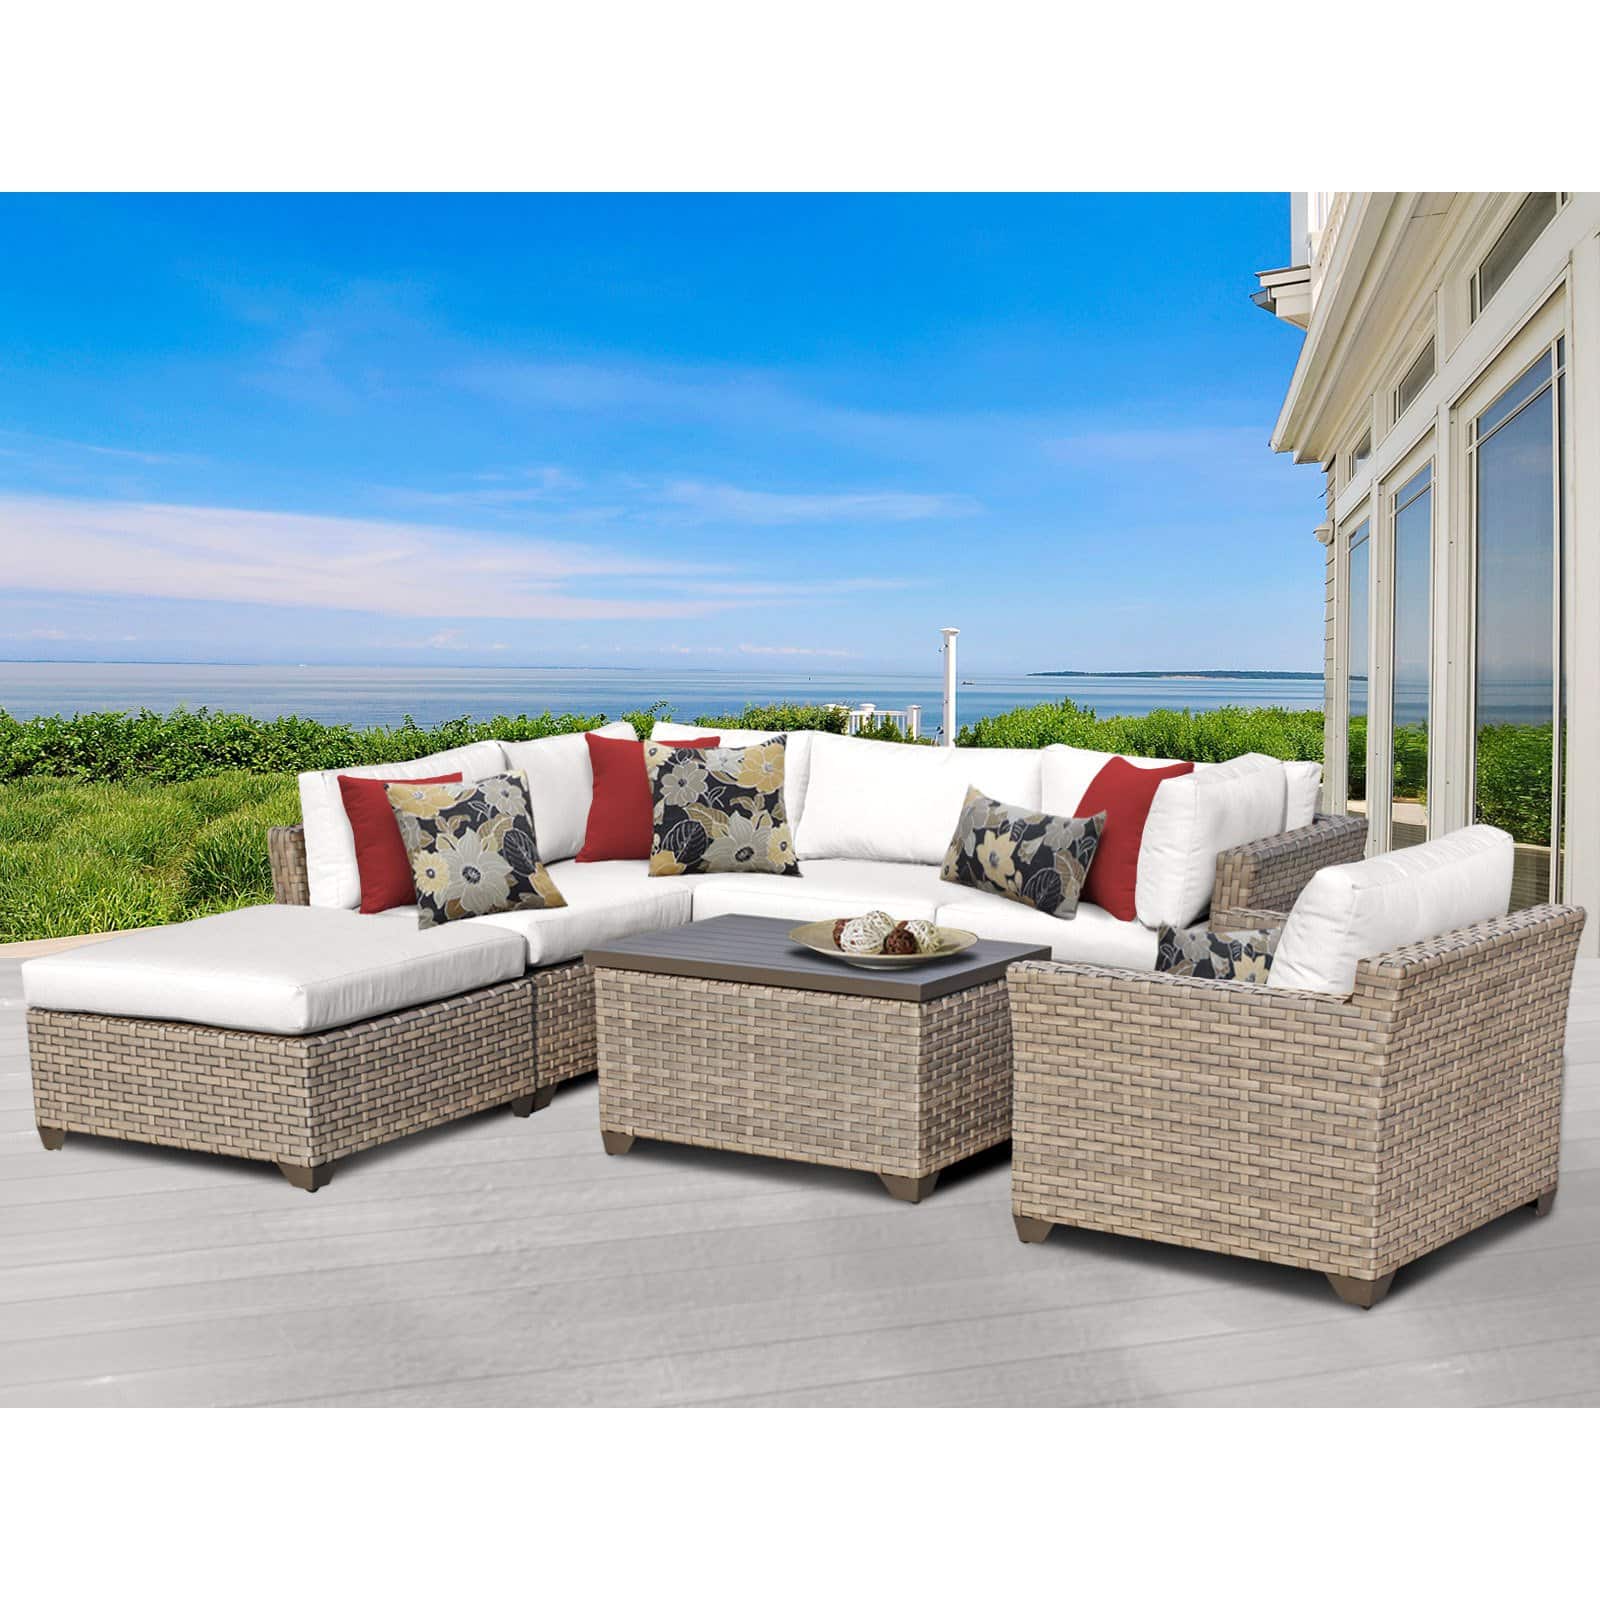 TK Classics Monterey Wicker 7 Piece Patio Conversation Set with Coffee Table and 2 Sets of Cushion Covers - image 5 of 5